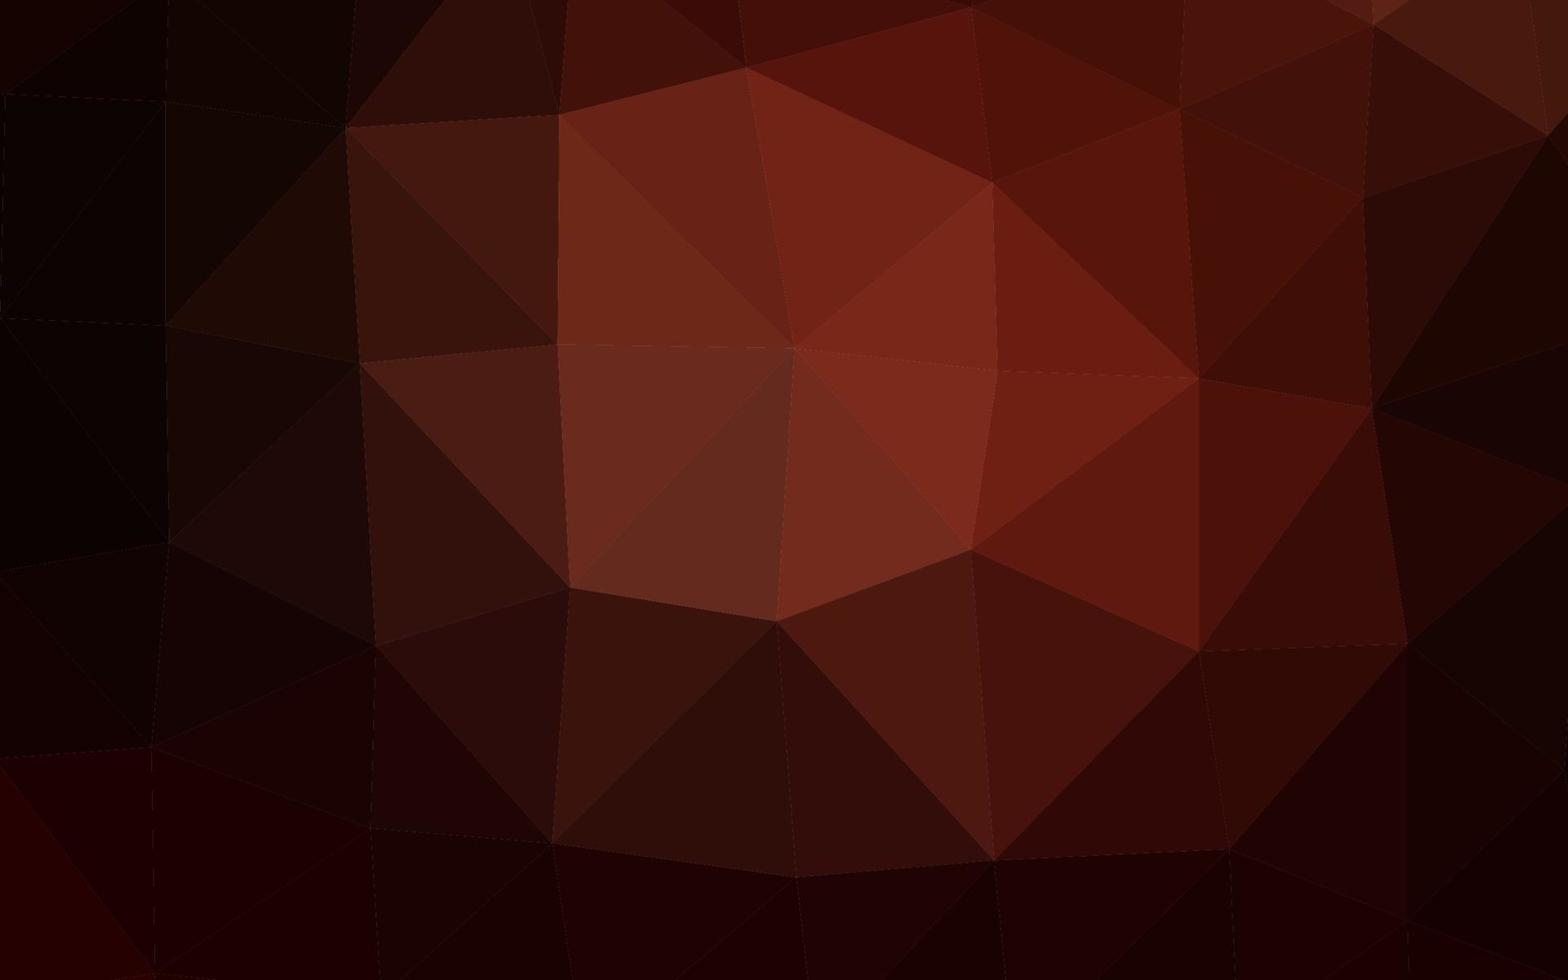 Dark Red vector abstract mosaic background.